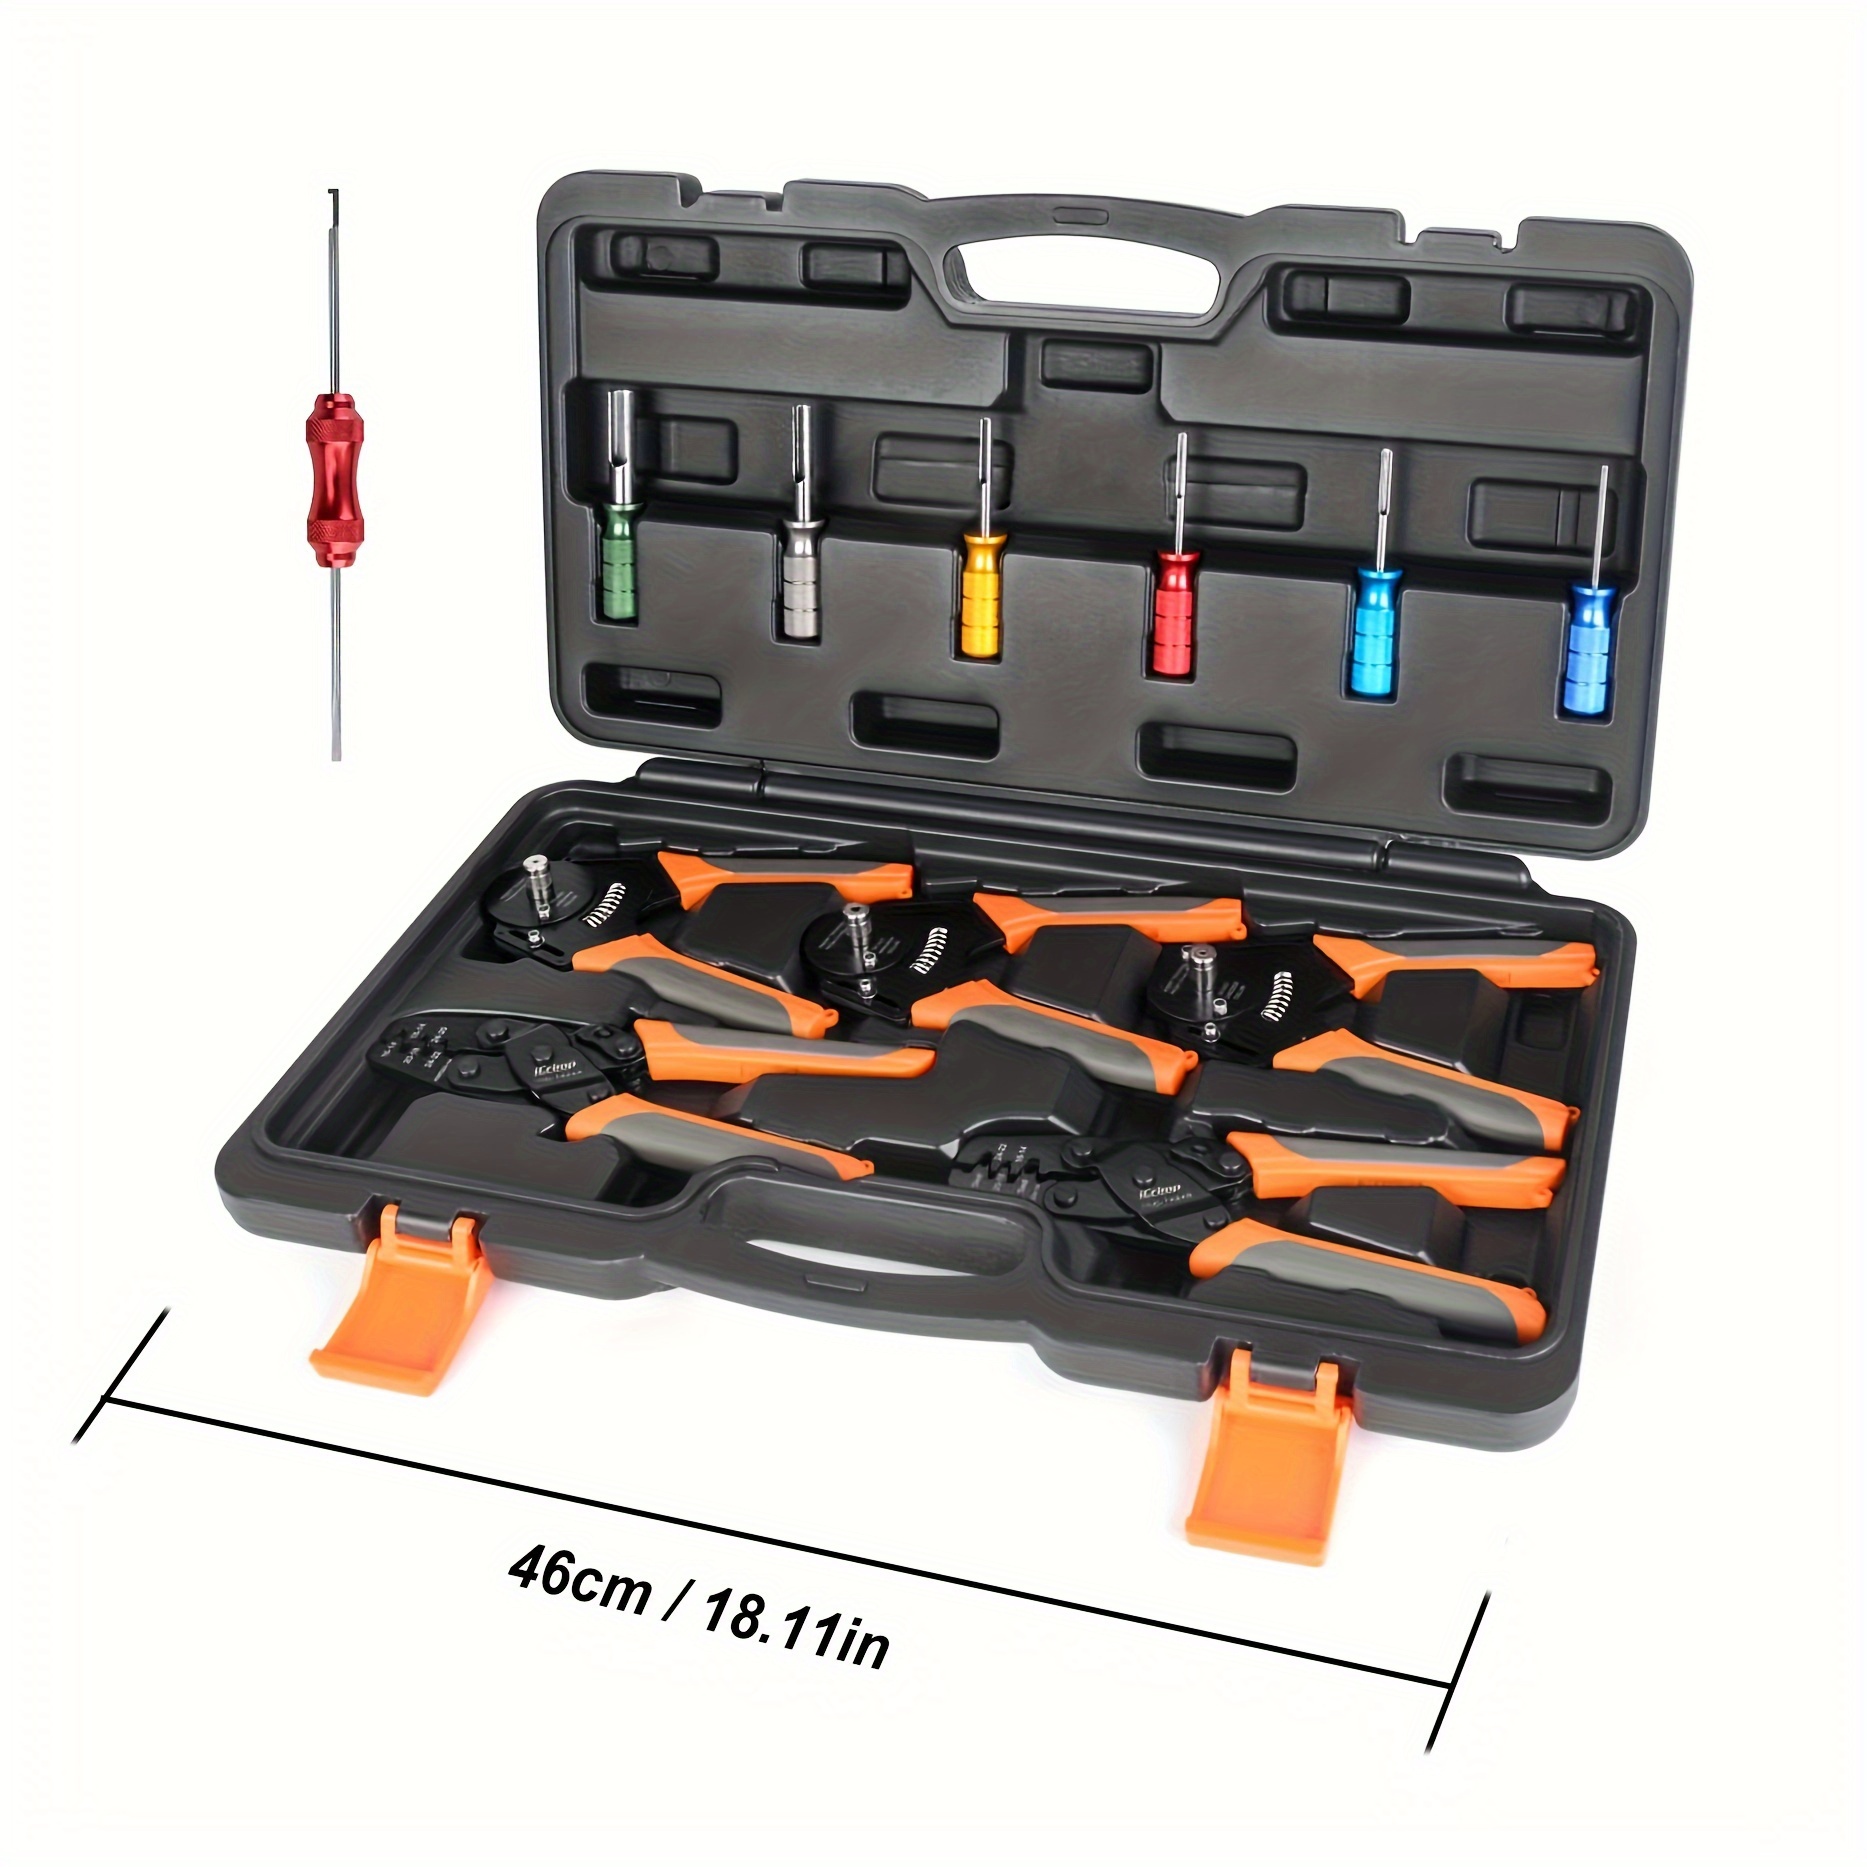 iCrimp Quick Change Ratcheting Crimper Tool Kit, Automotive Service Kit,  Crimping IWS4 Connector, Insulated & Non-insulated Terminal, Dupont  Connector